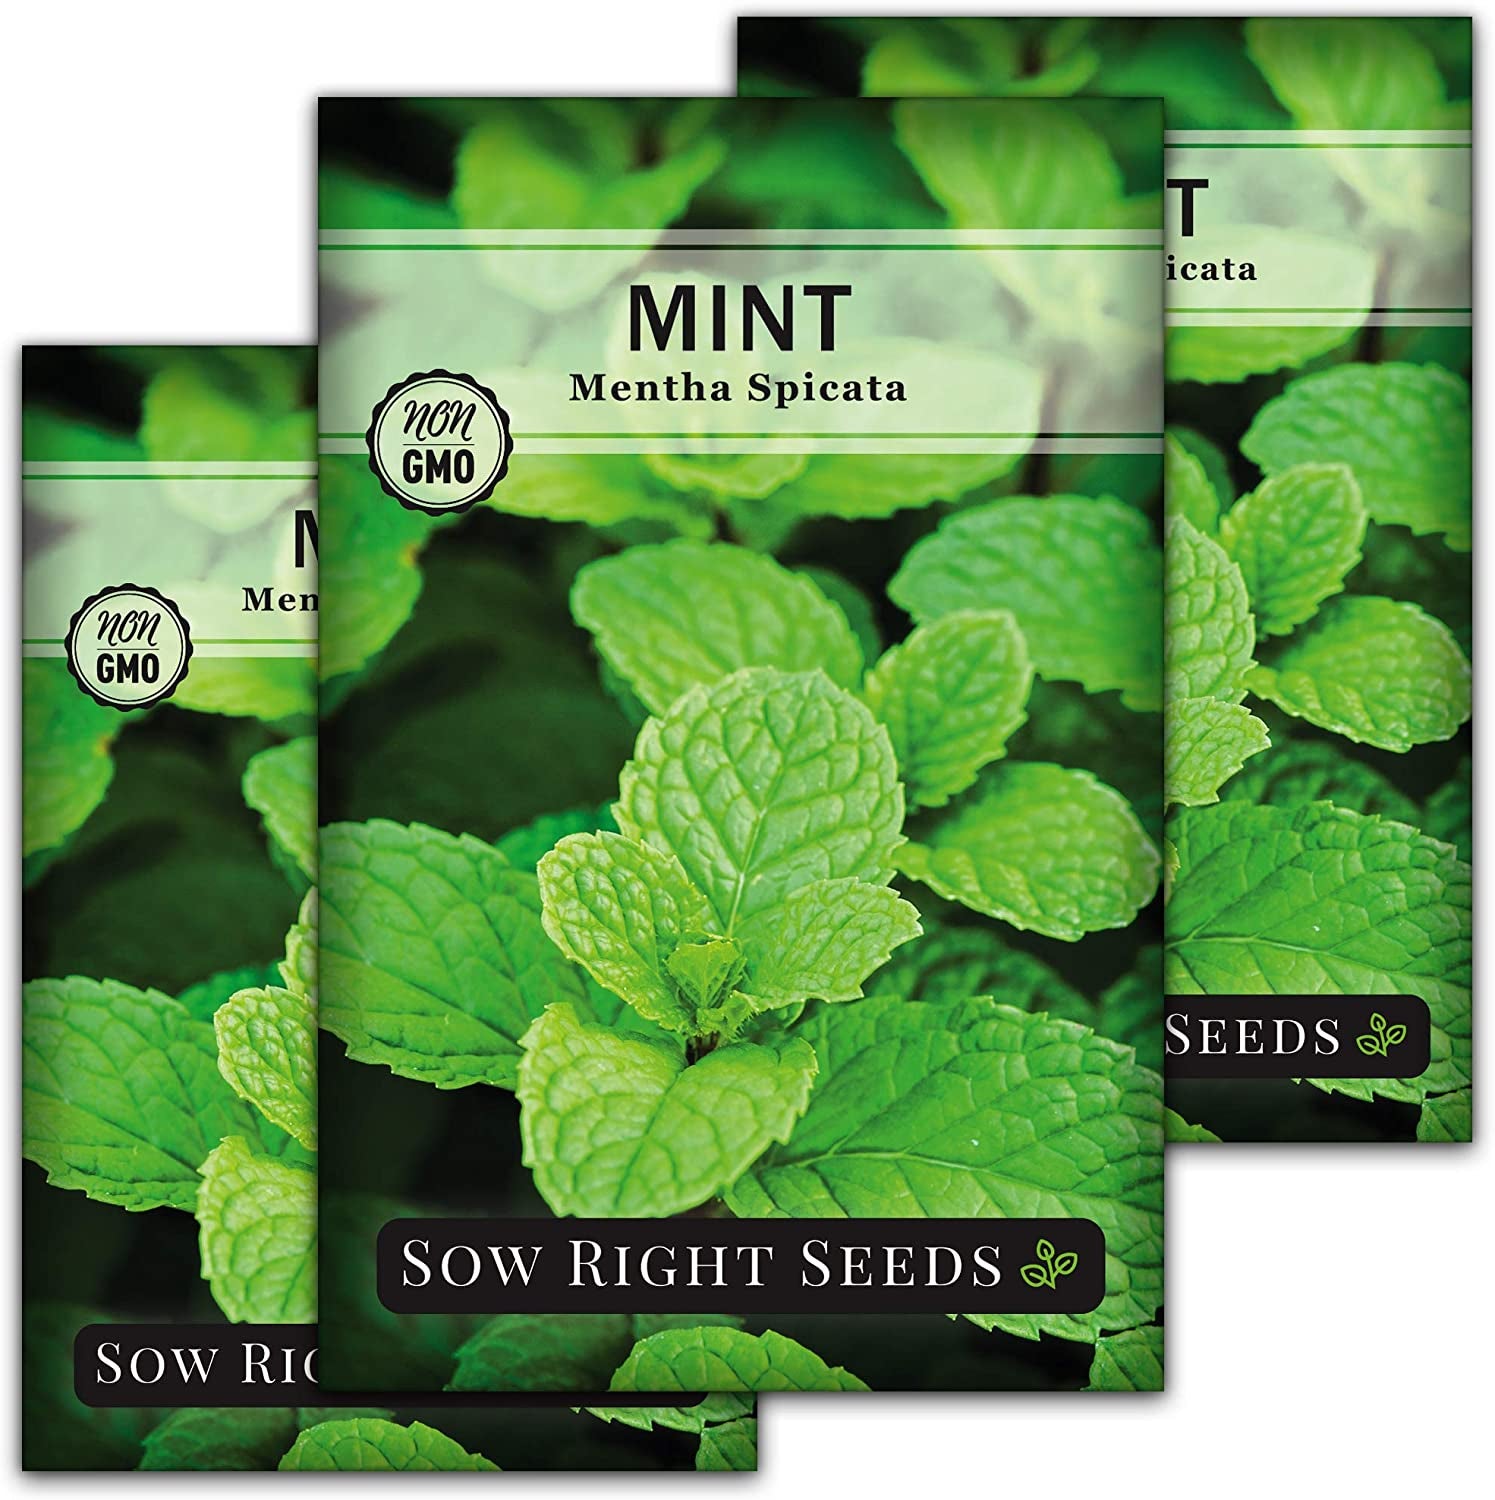 - Mint Seed for Planting - Non-Gmo Heirloom Packet with Instructions to Plant an Herbal Tea Garden - Indoors or Outdoor - Perennial and Fragrant - Hydroponics and Kitchen Gardening (3)